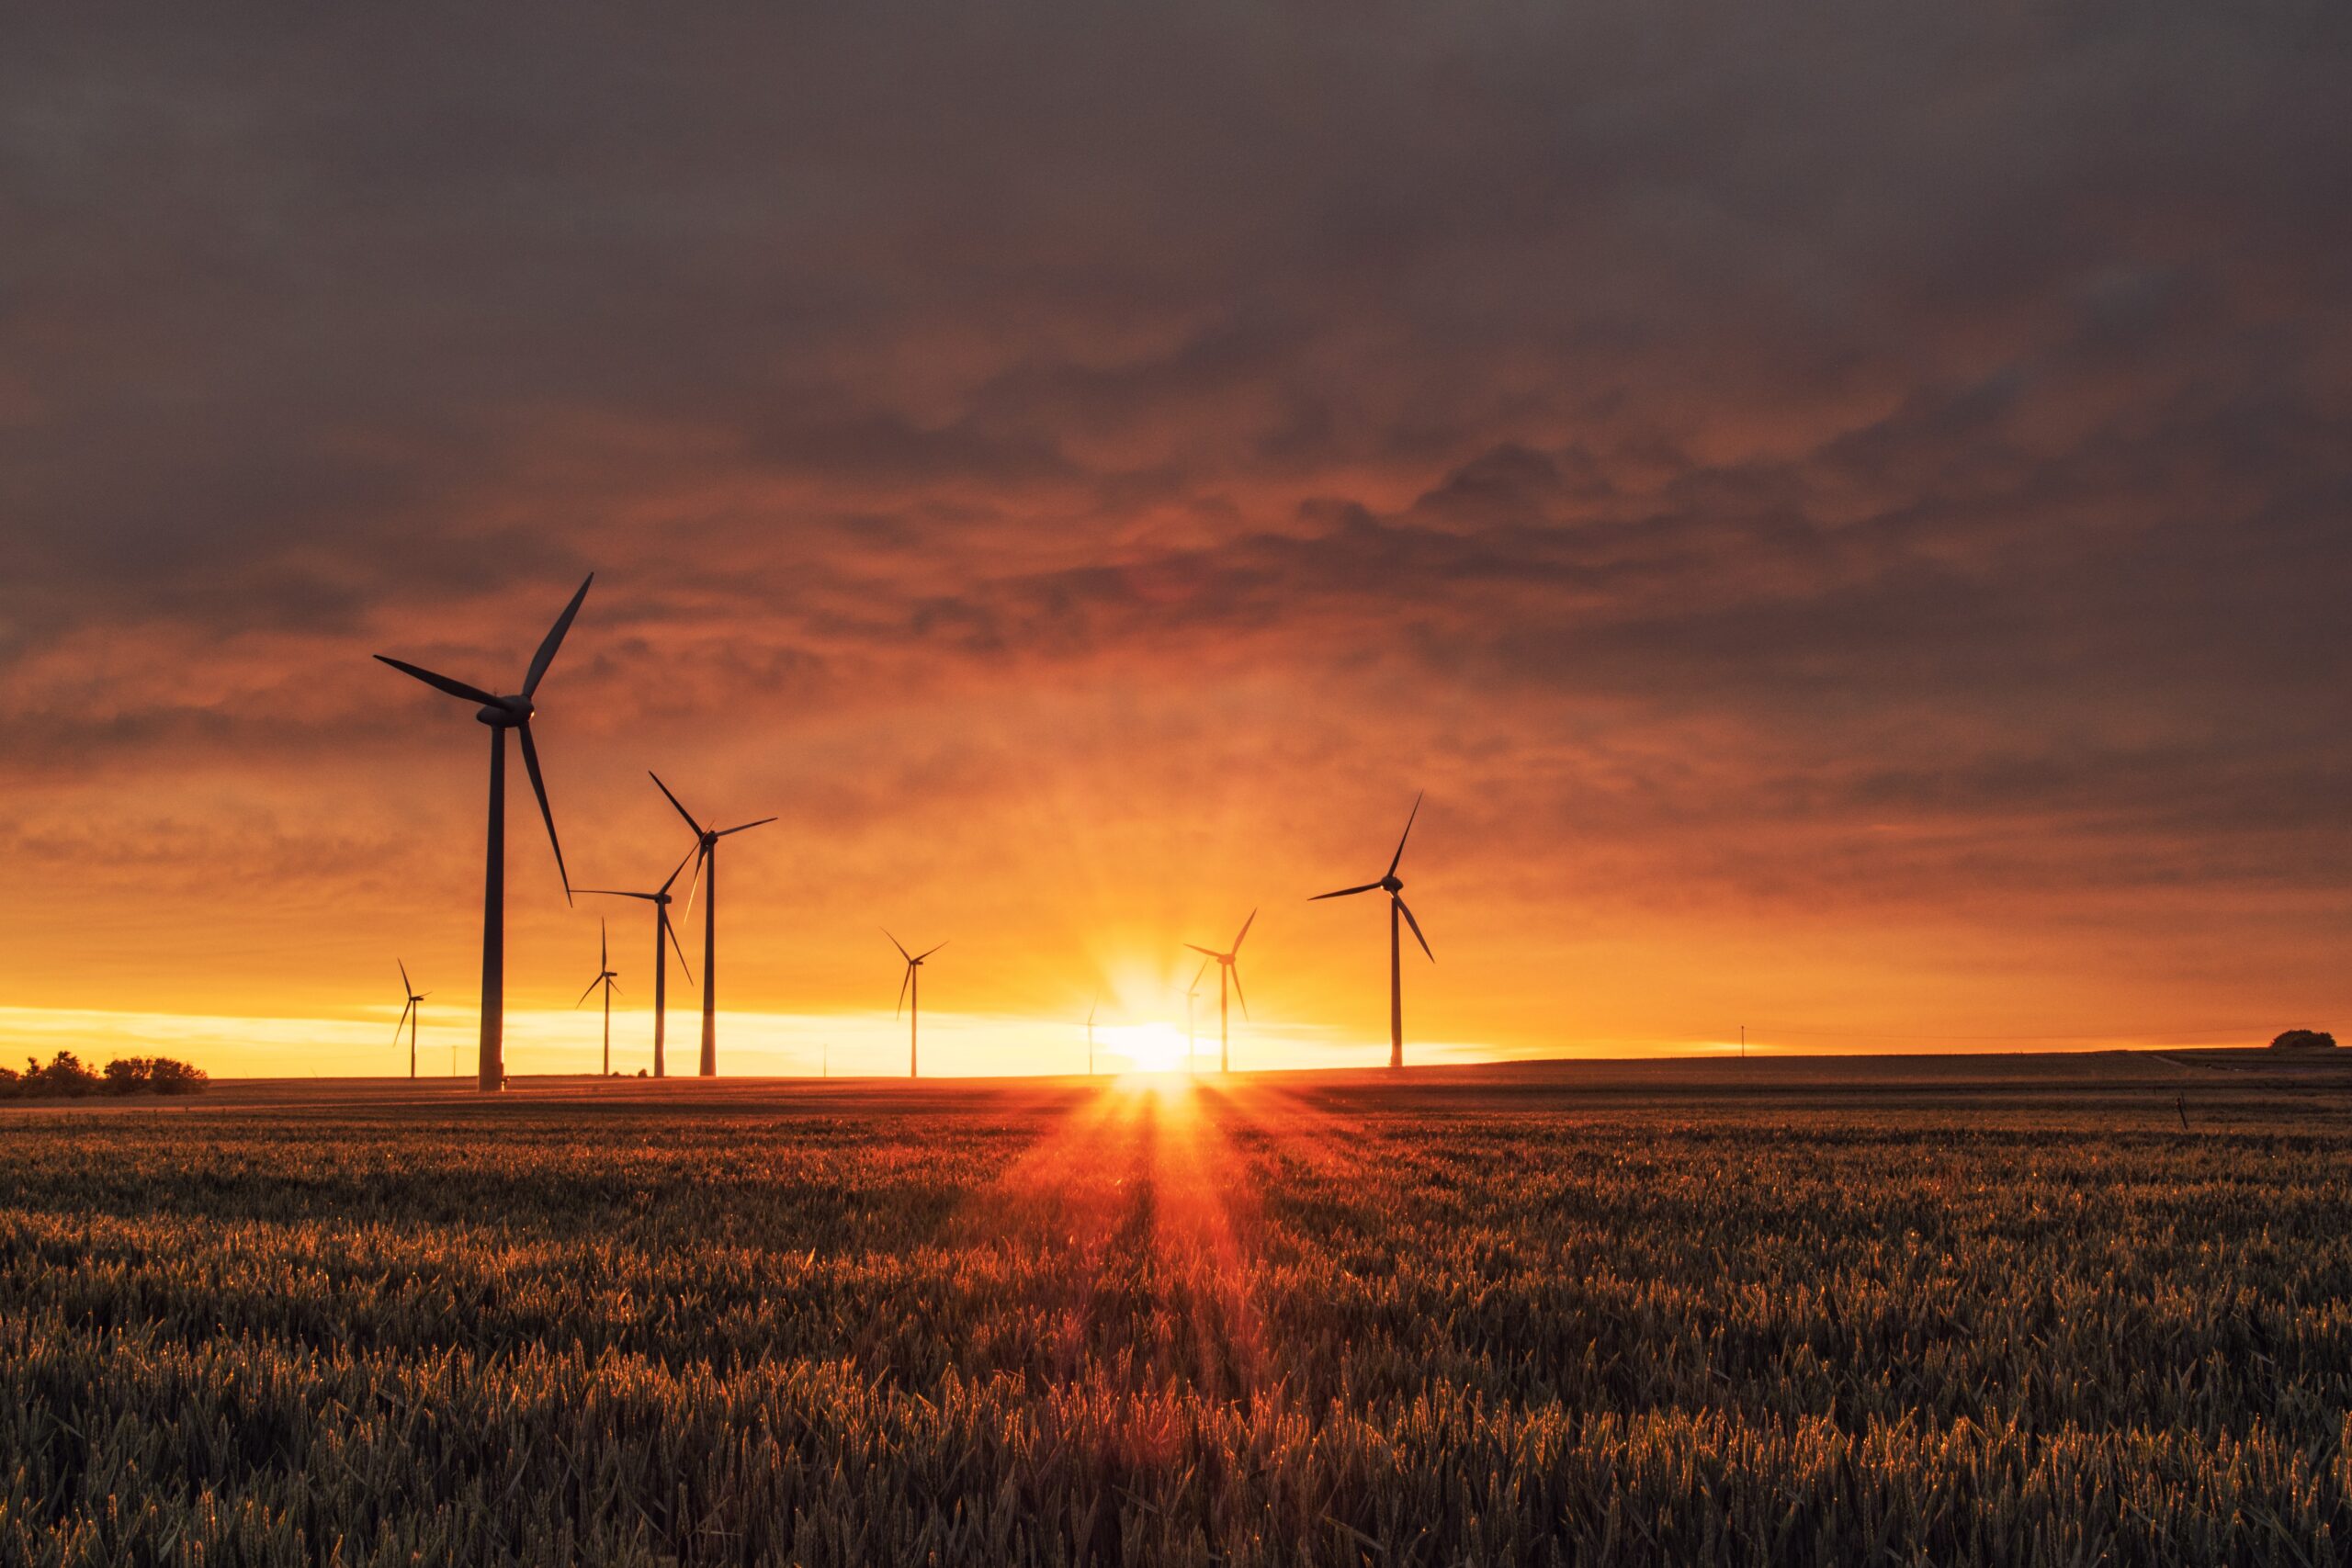 Climate Change Crisis Has Driven the Efforts to Find Renewable Energy, But With Intermittent Availability of Wind and Solar, Hydrogen Remains a Promising Source